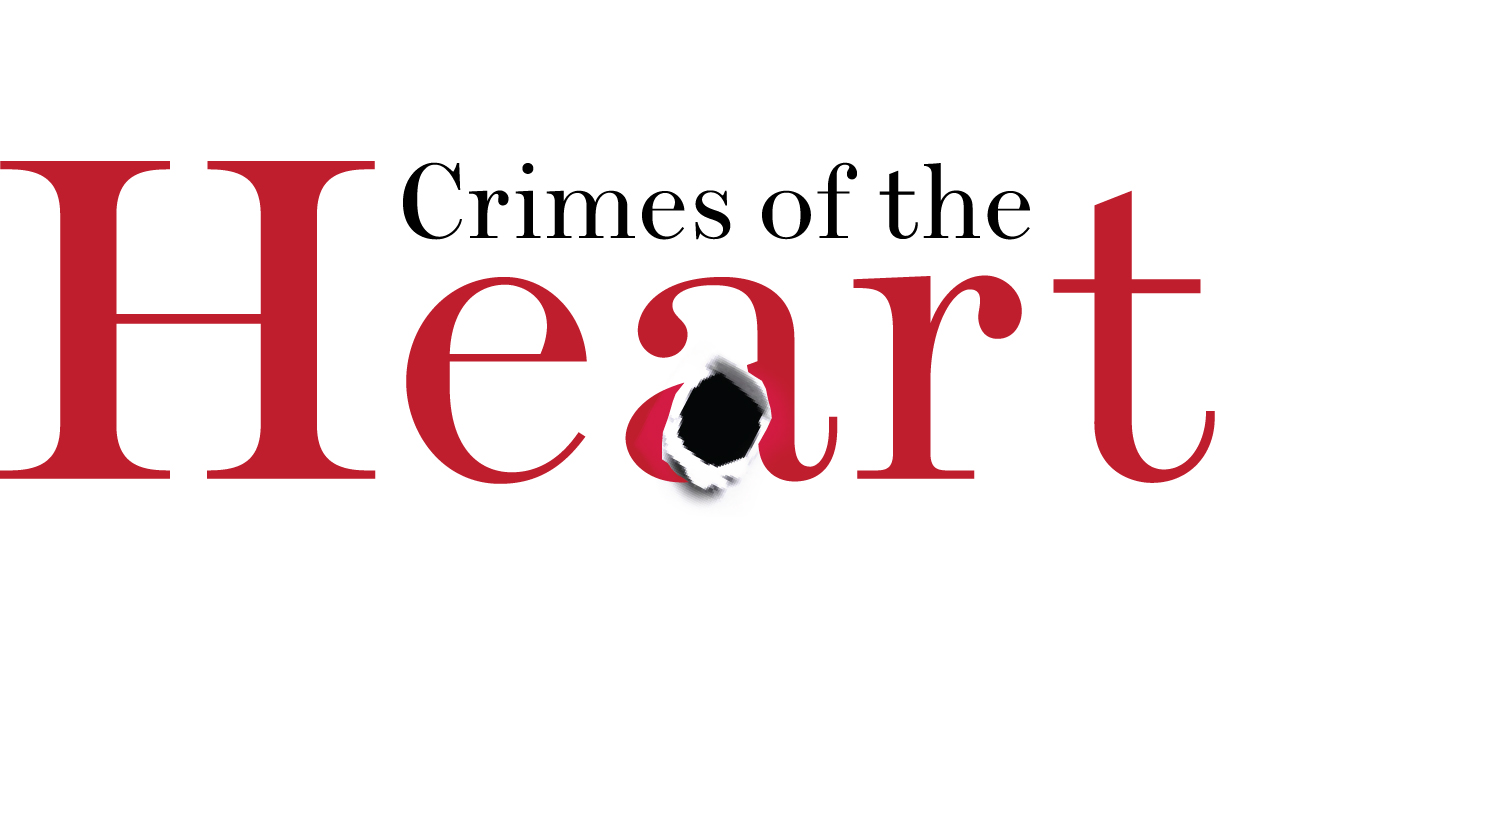 Ponca Playhouse sets auditions for “Crimes of the Heart”